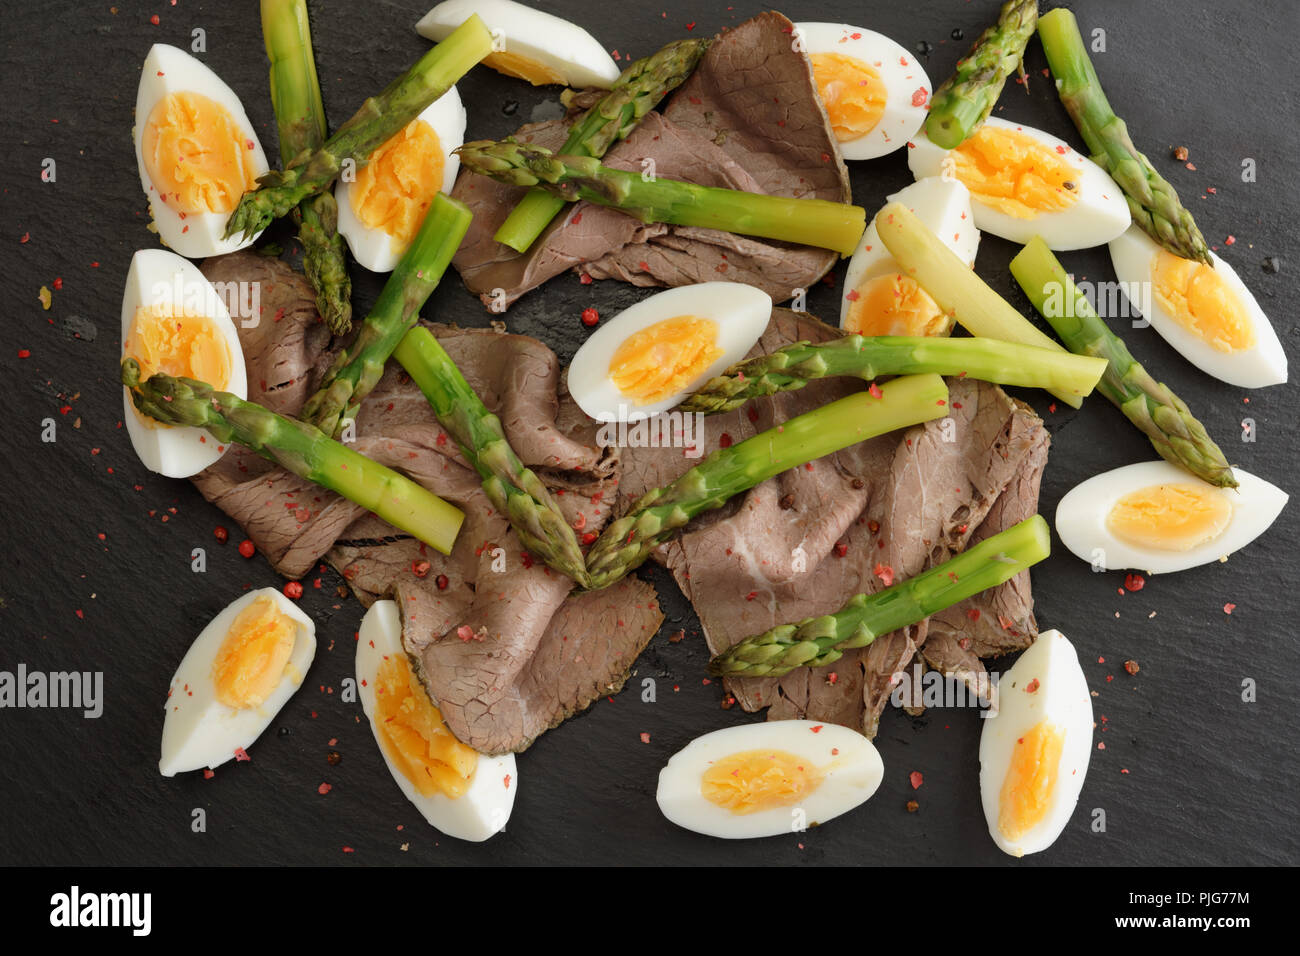 Roastbeef, asparagus, and boiled eggs salad background Stock Photo